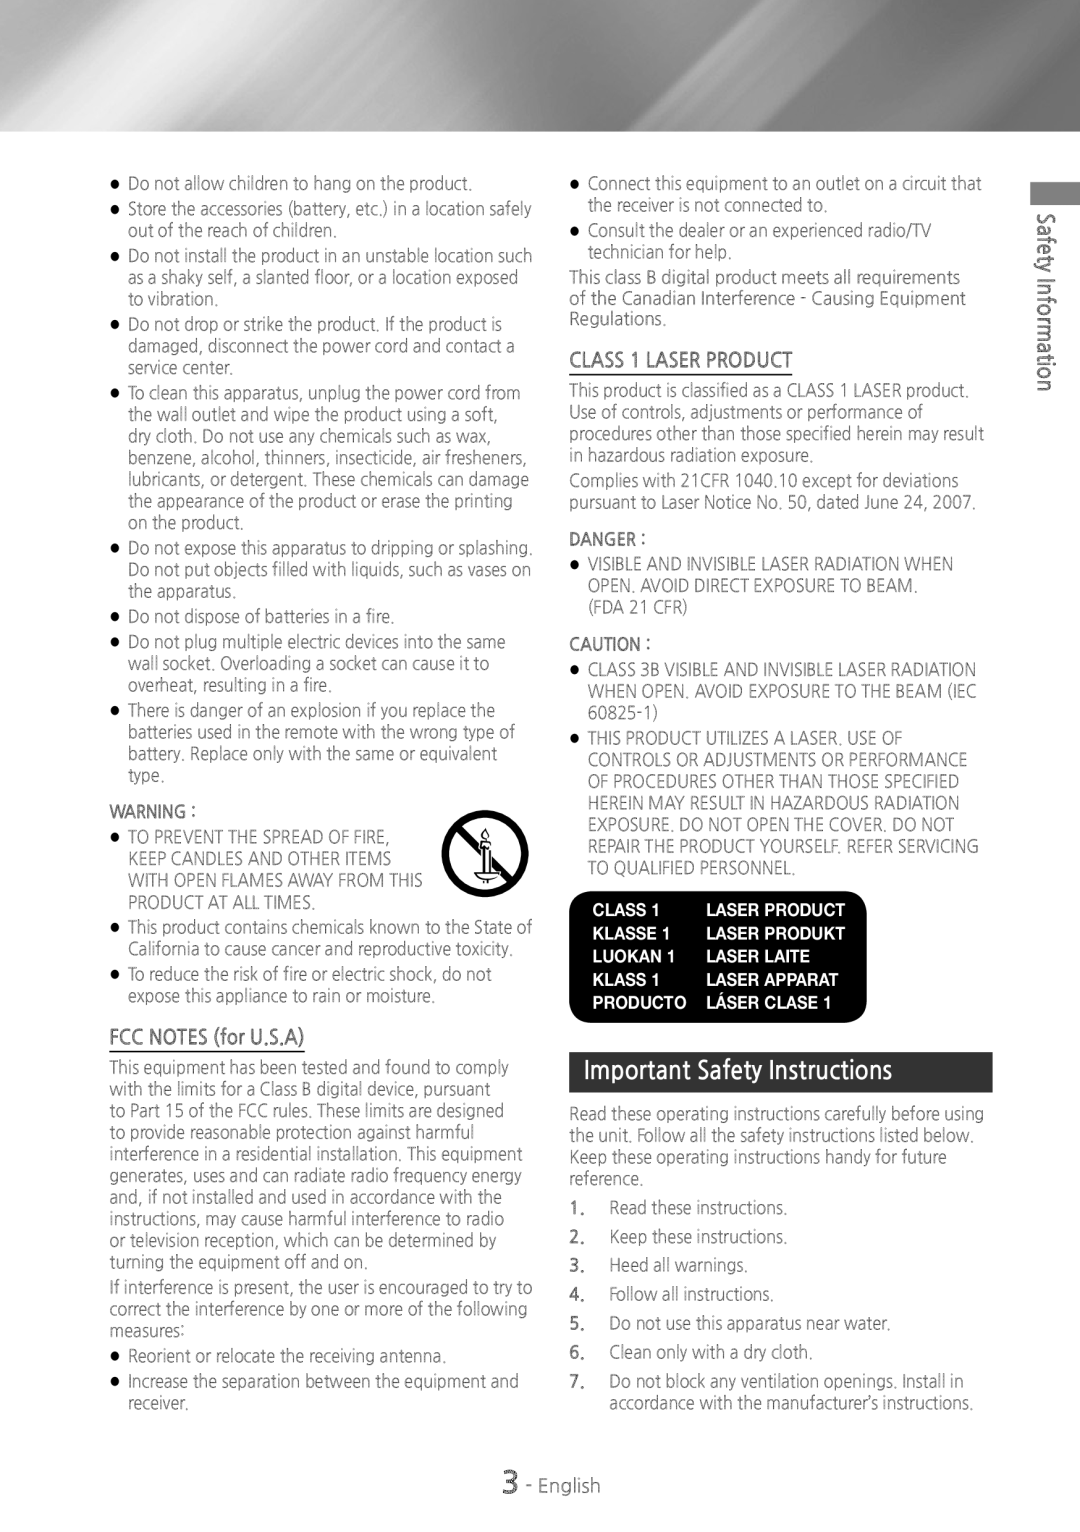 Samsung HT-H4500 Important Safety Instructions, FCC NOTES for U.S.A, CLASS 1 LASER product, Safety Information, Class 